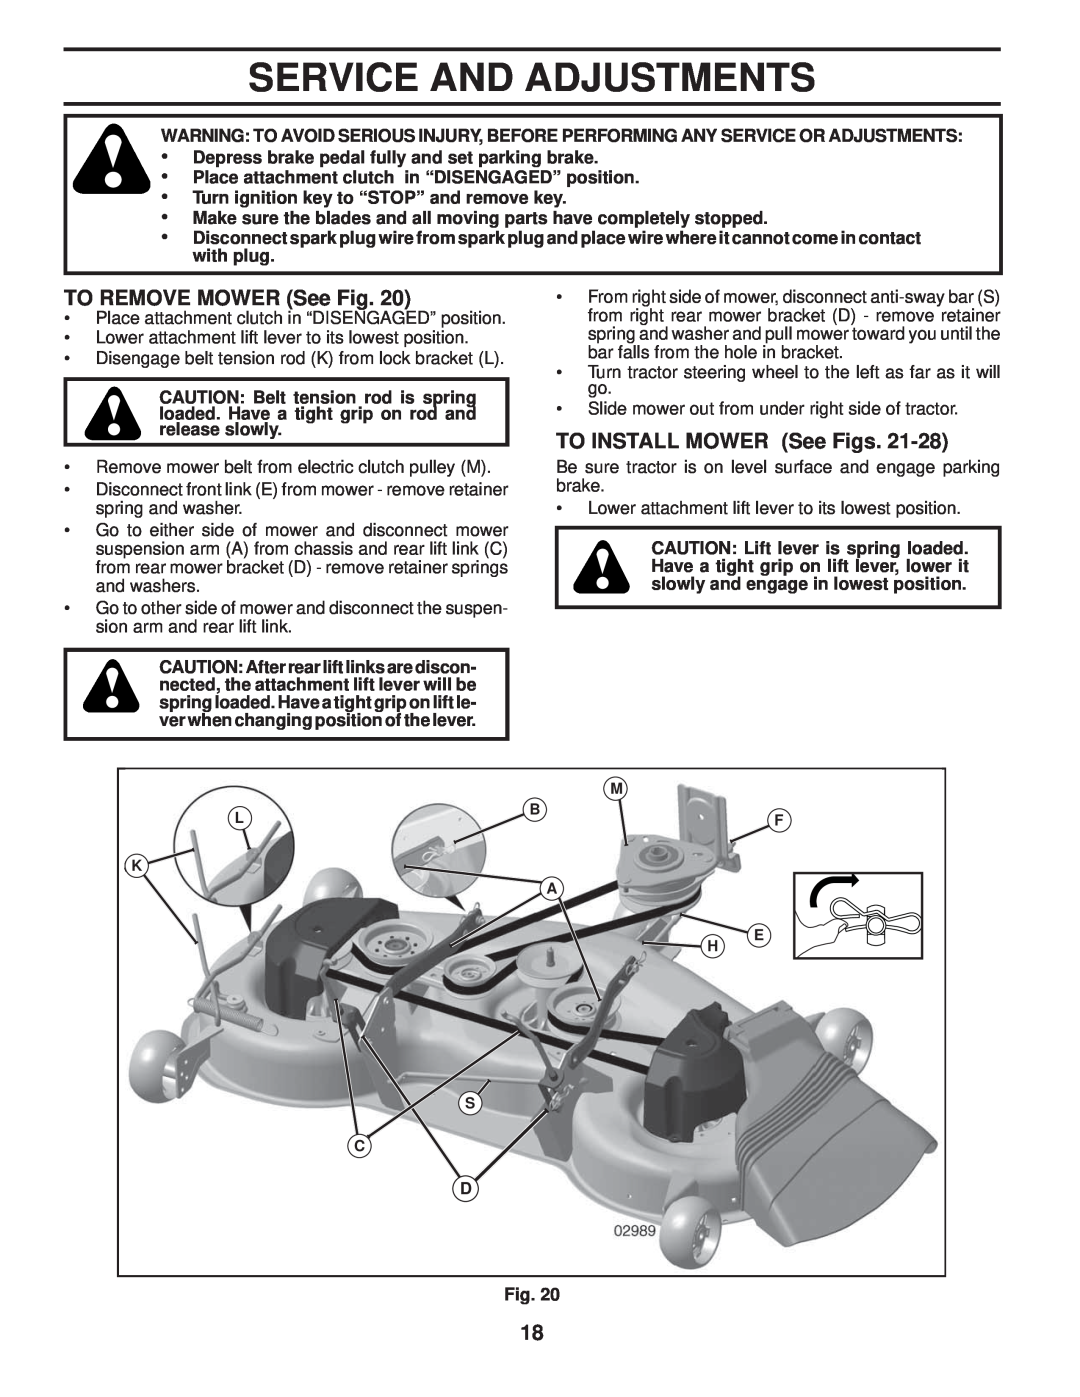 Husqvarna 96045001900 owner manual Service And Adjustments, TO REMOVE MOWER See Fig, TO INSTALL MOWER See Figs 